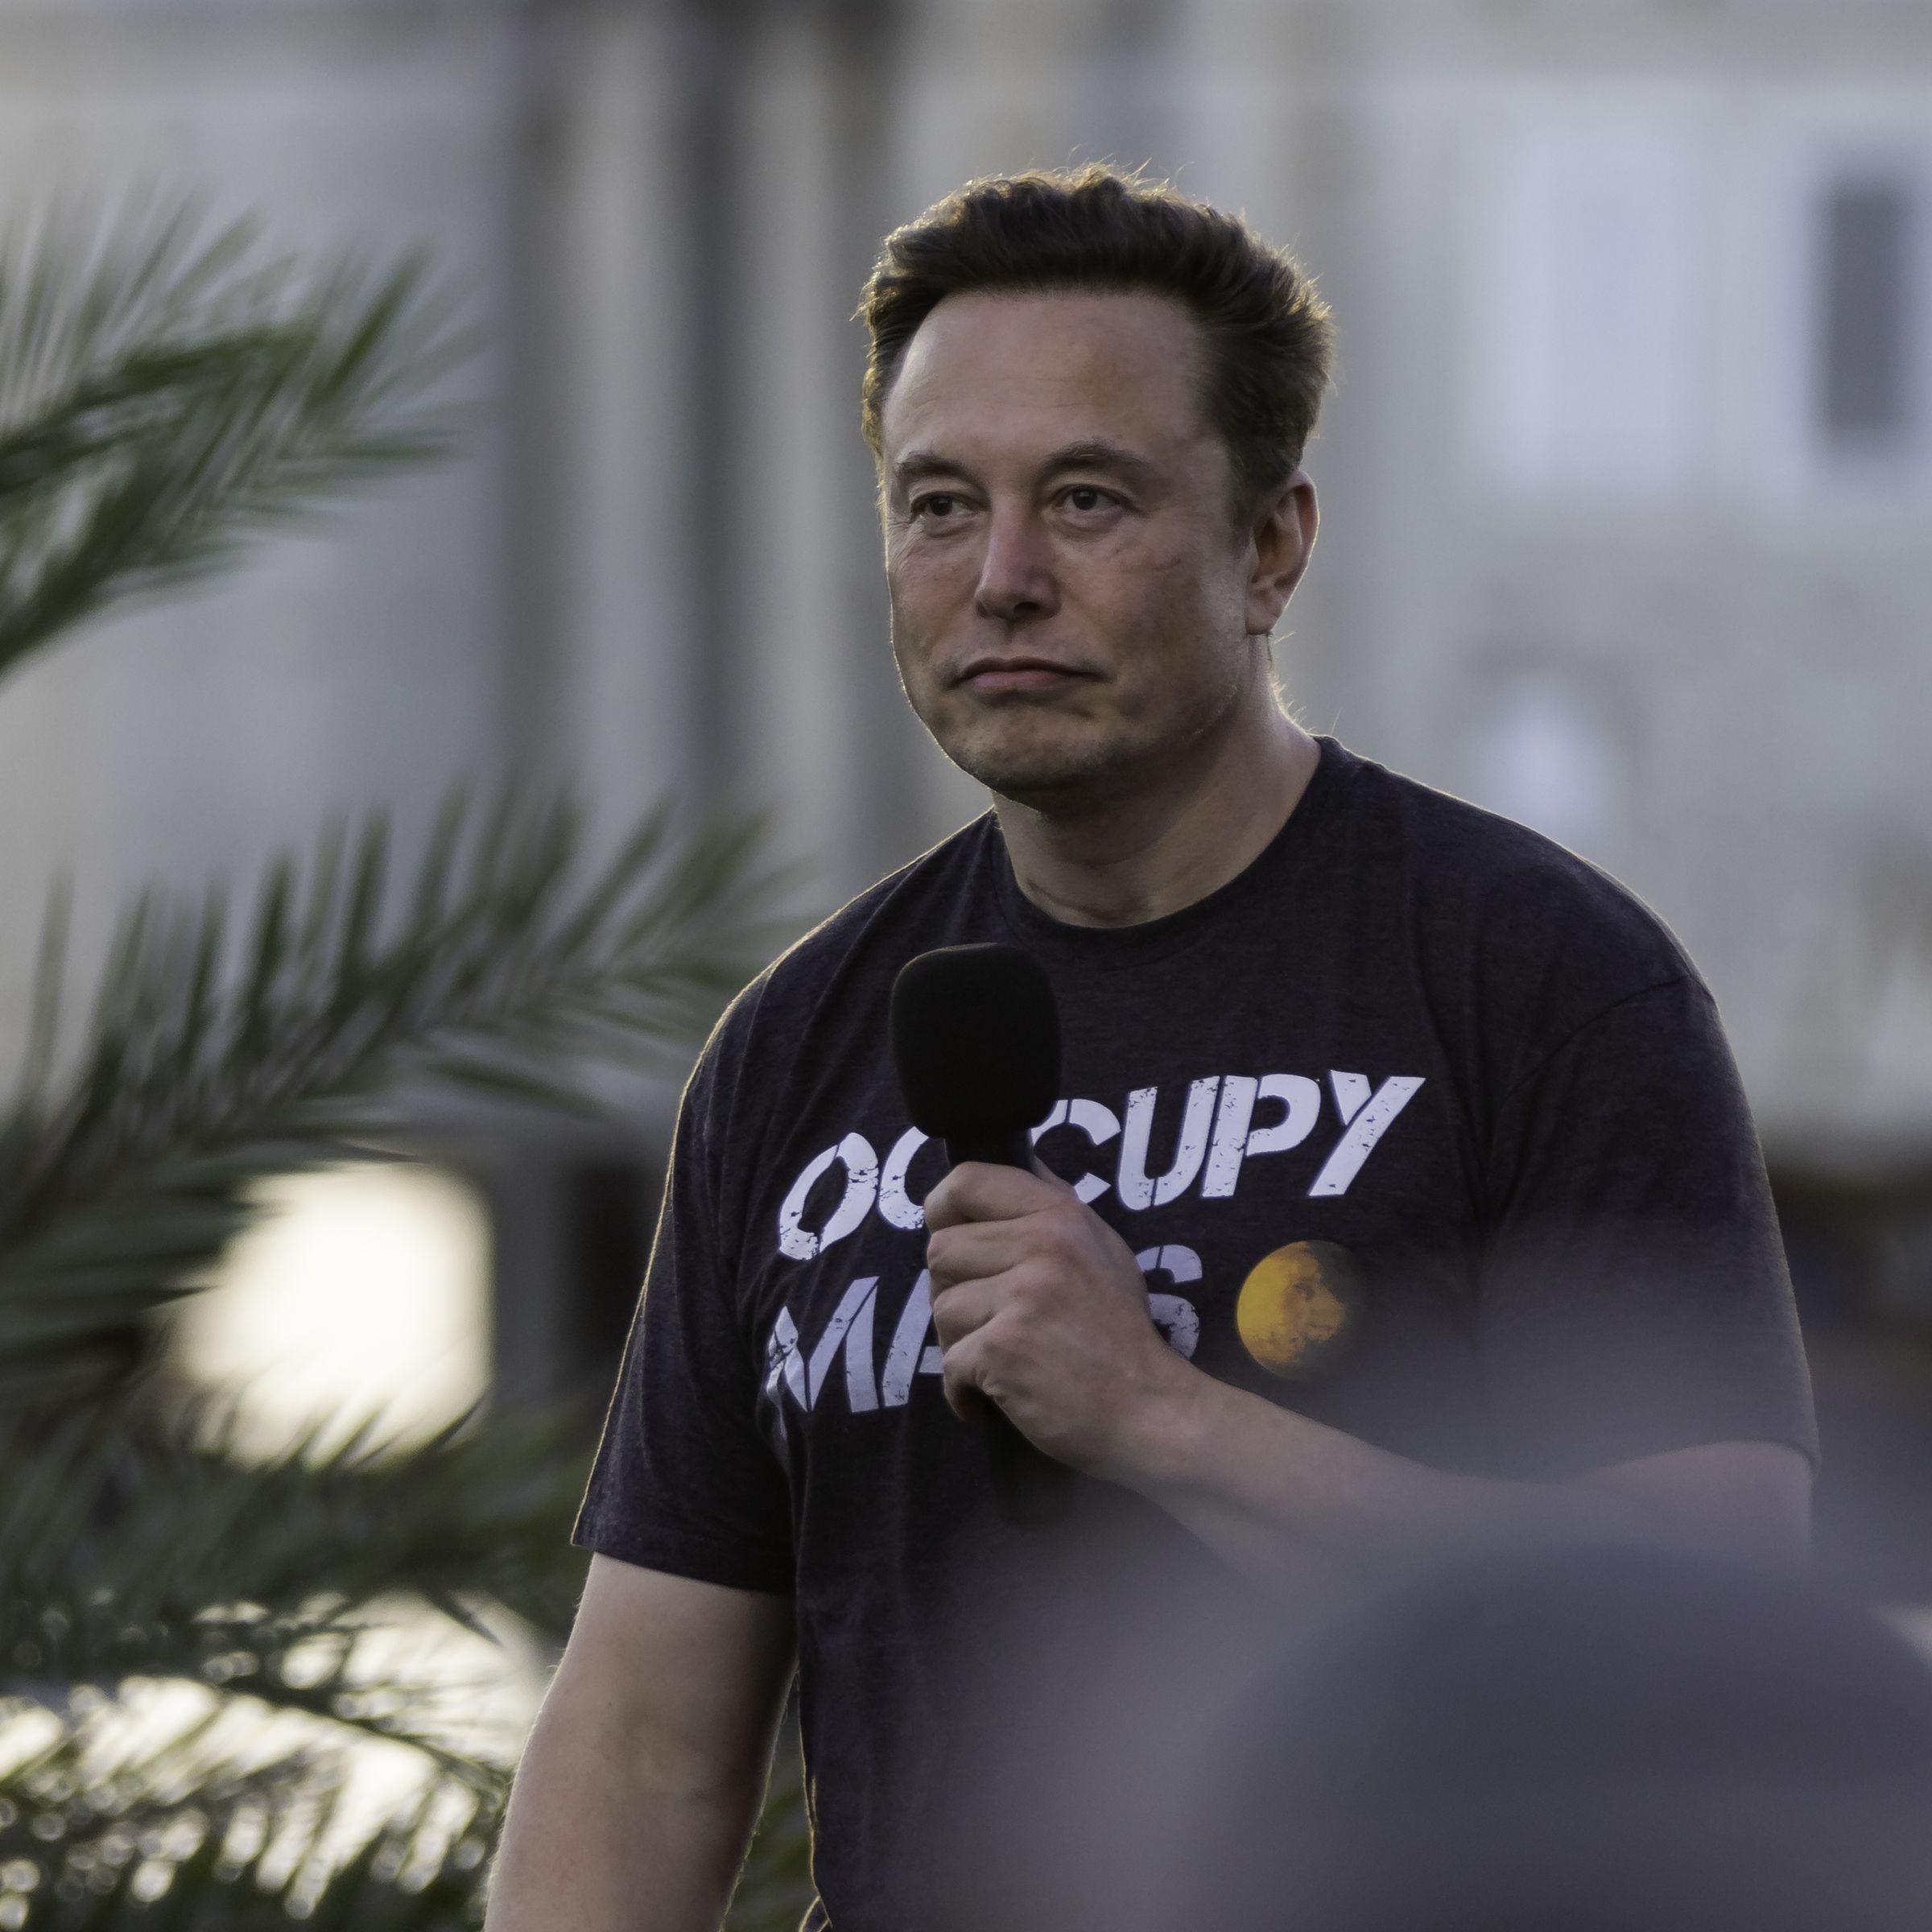 Elon Musk holds a microphone to his face while wearing a T-shirt that says “Occupy Mars.”